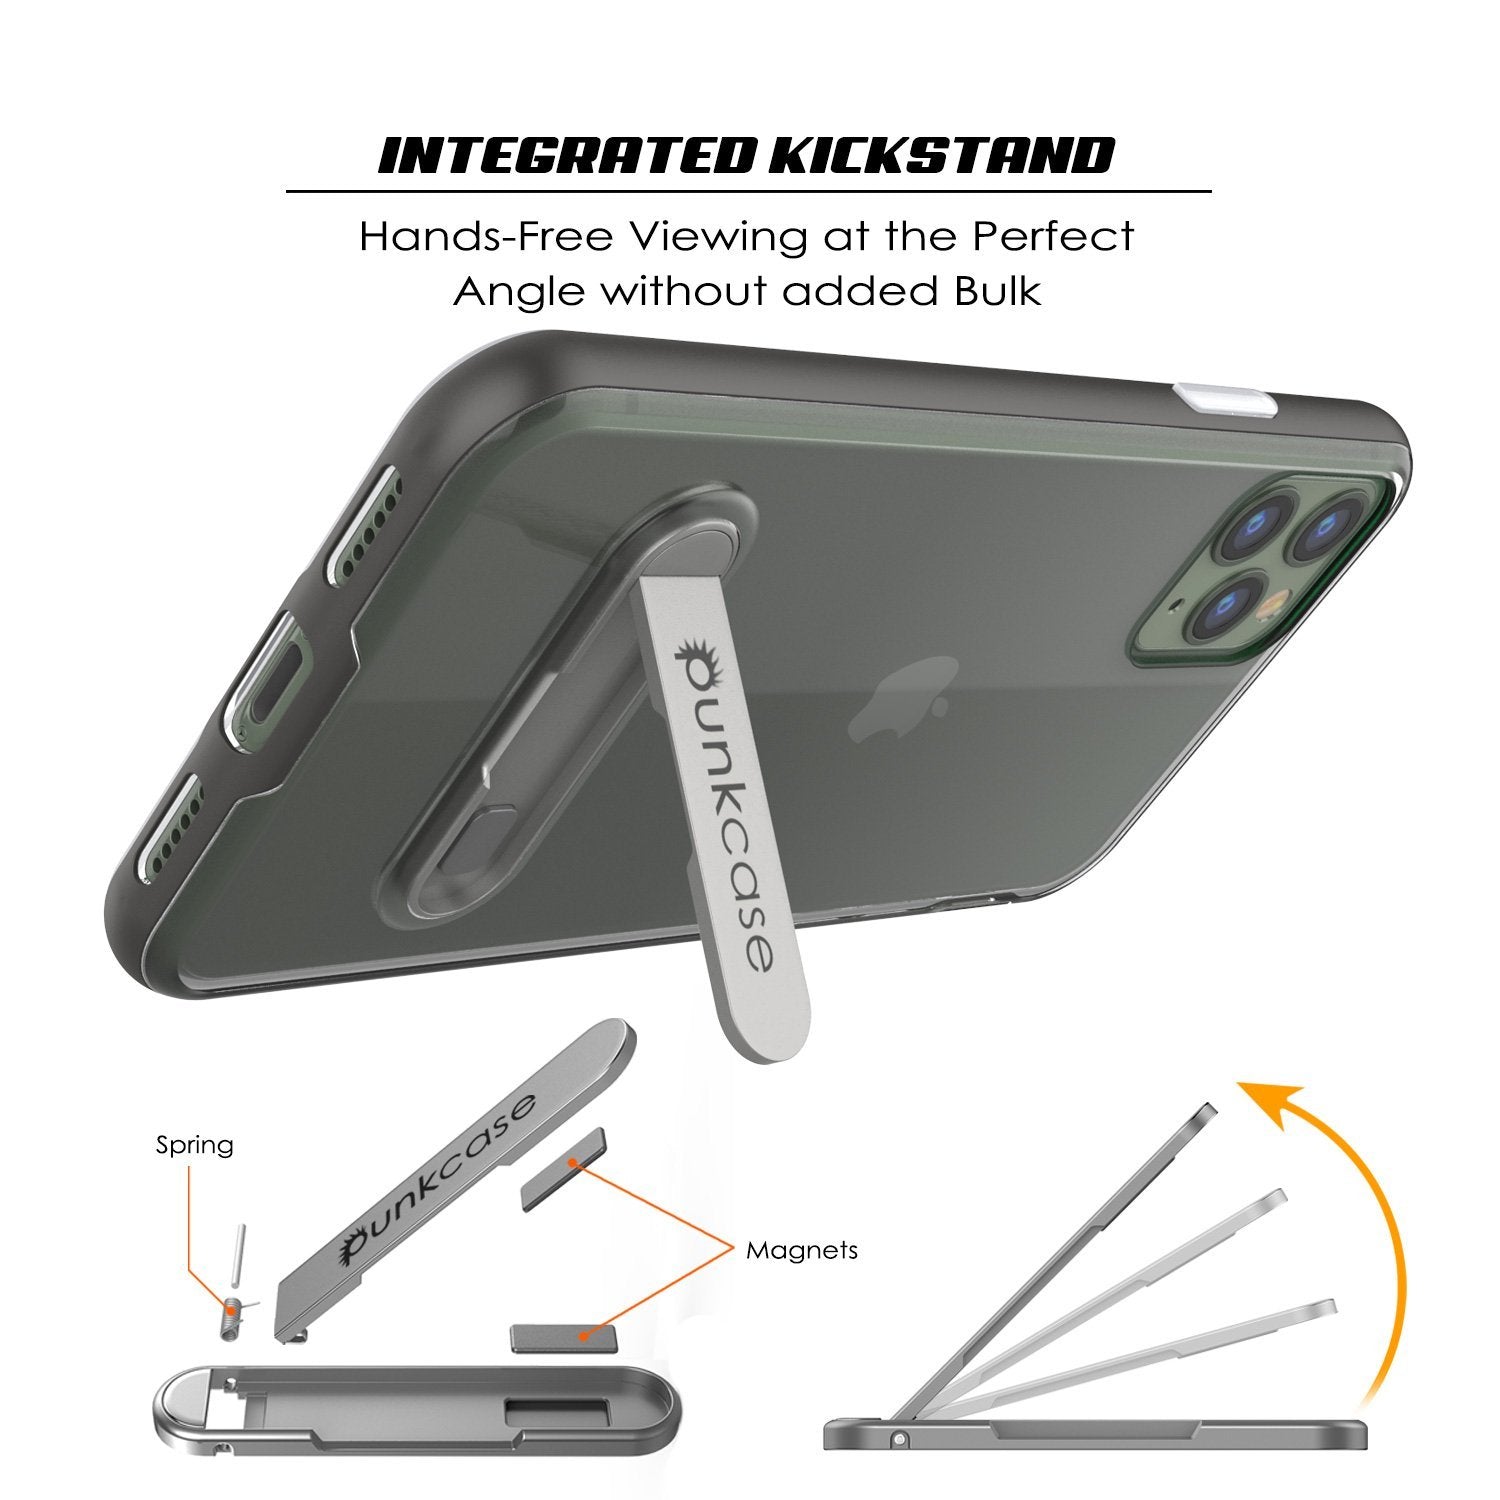 iPhone 12 Pro Case, PUNKcase [LUCID 3.0 Series] [Slim Fit] Protective Cover w/ Integrated Screen Protector [Grey]